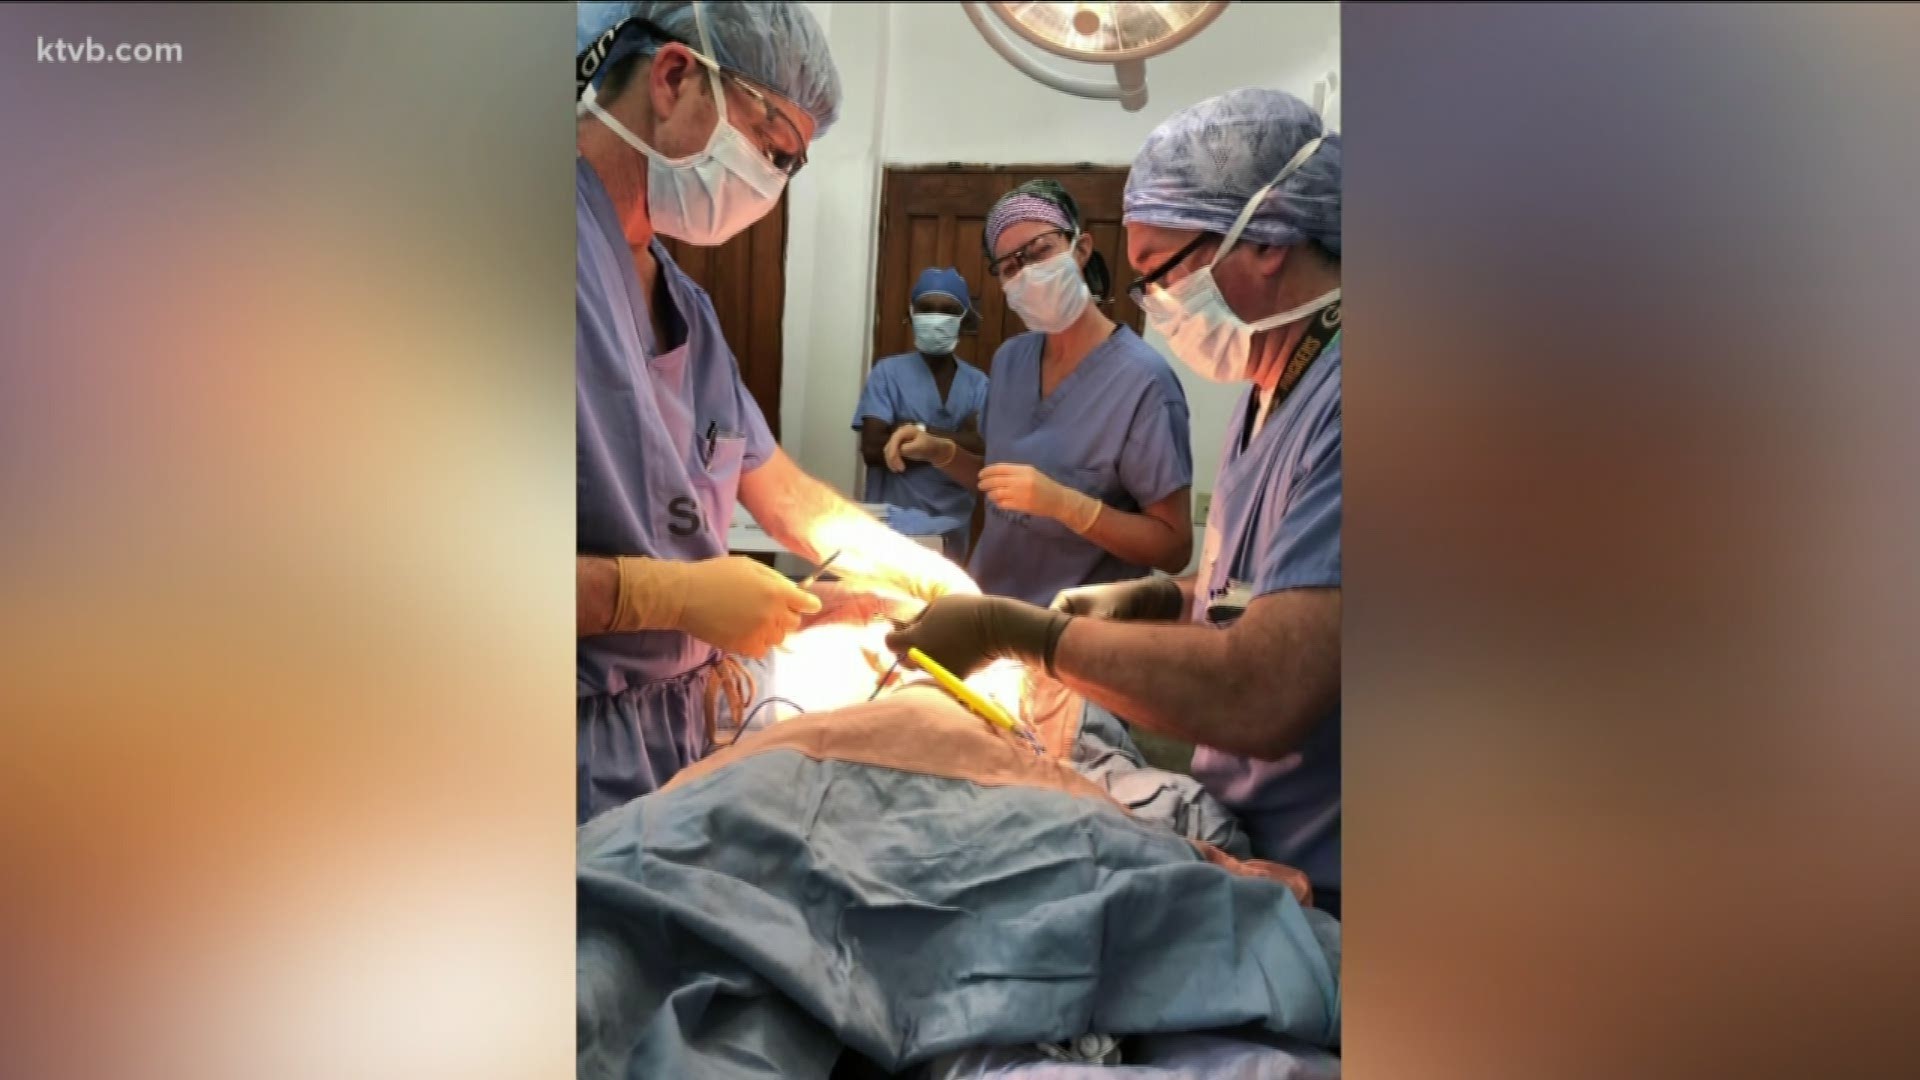 The couples were part of a team that performed nearly 50 surgeries in a week.